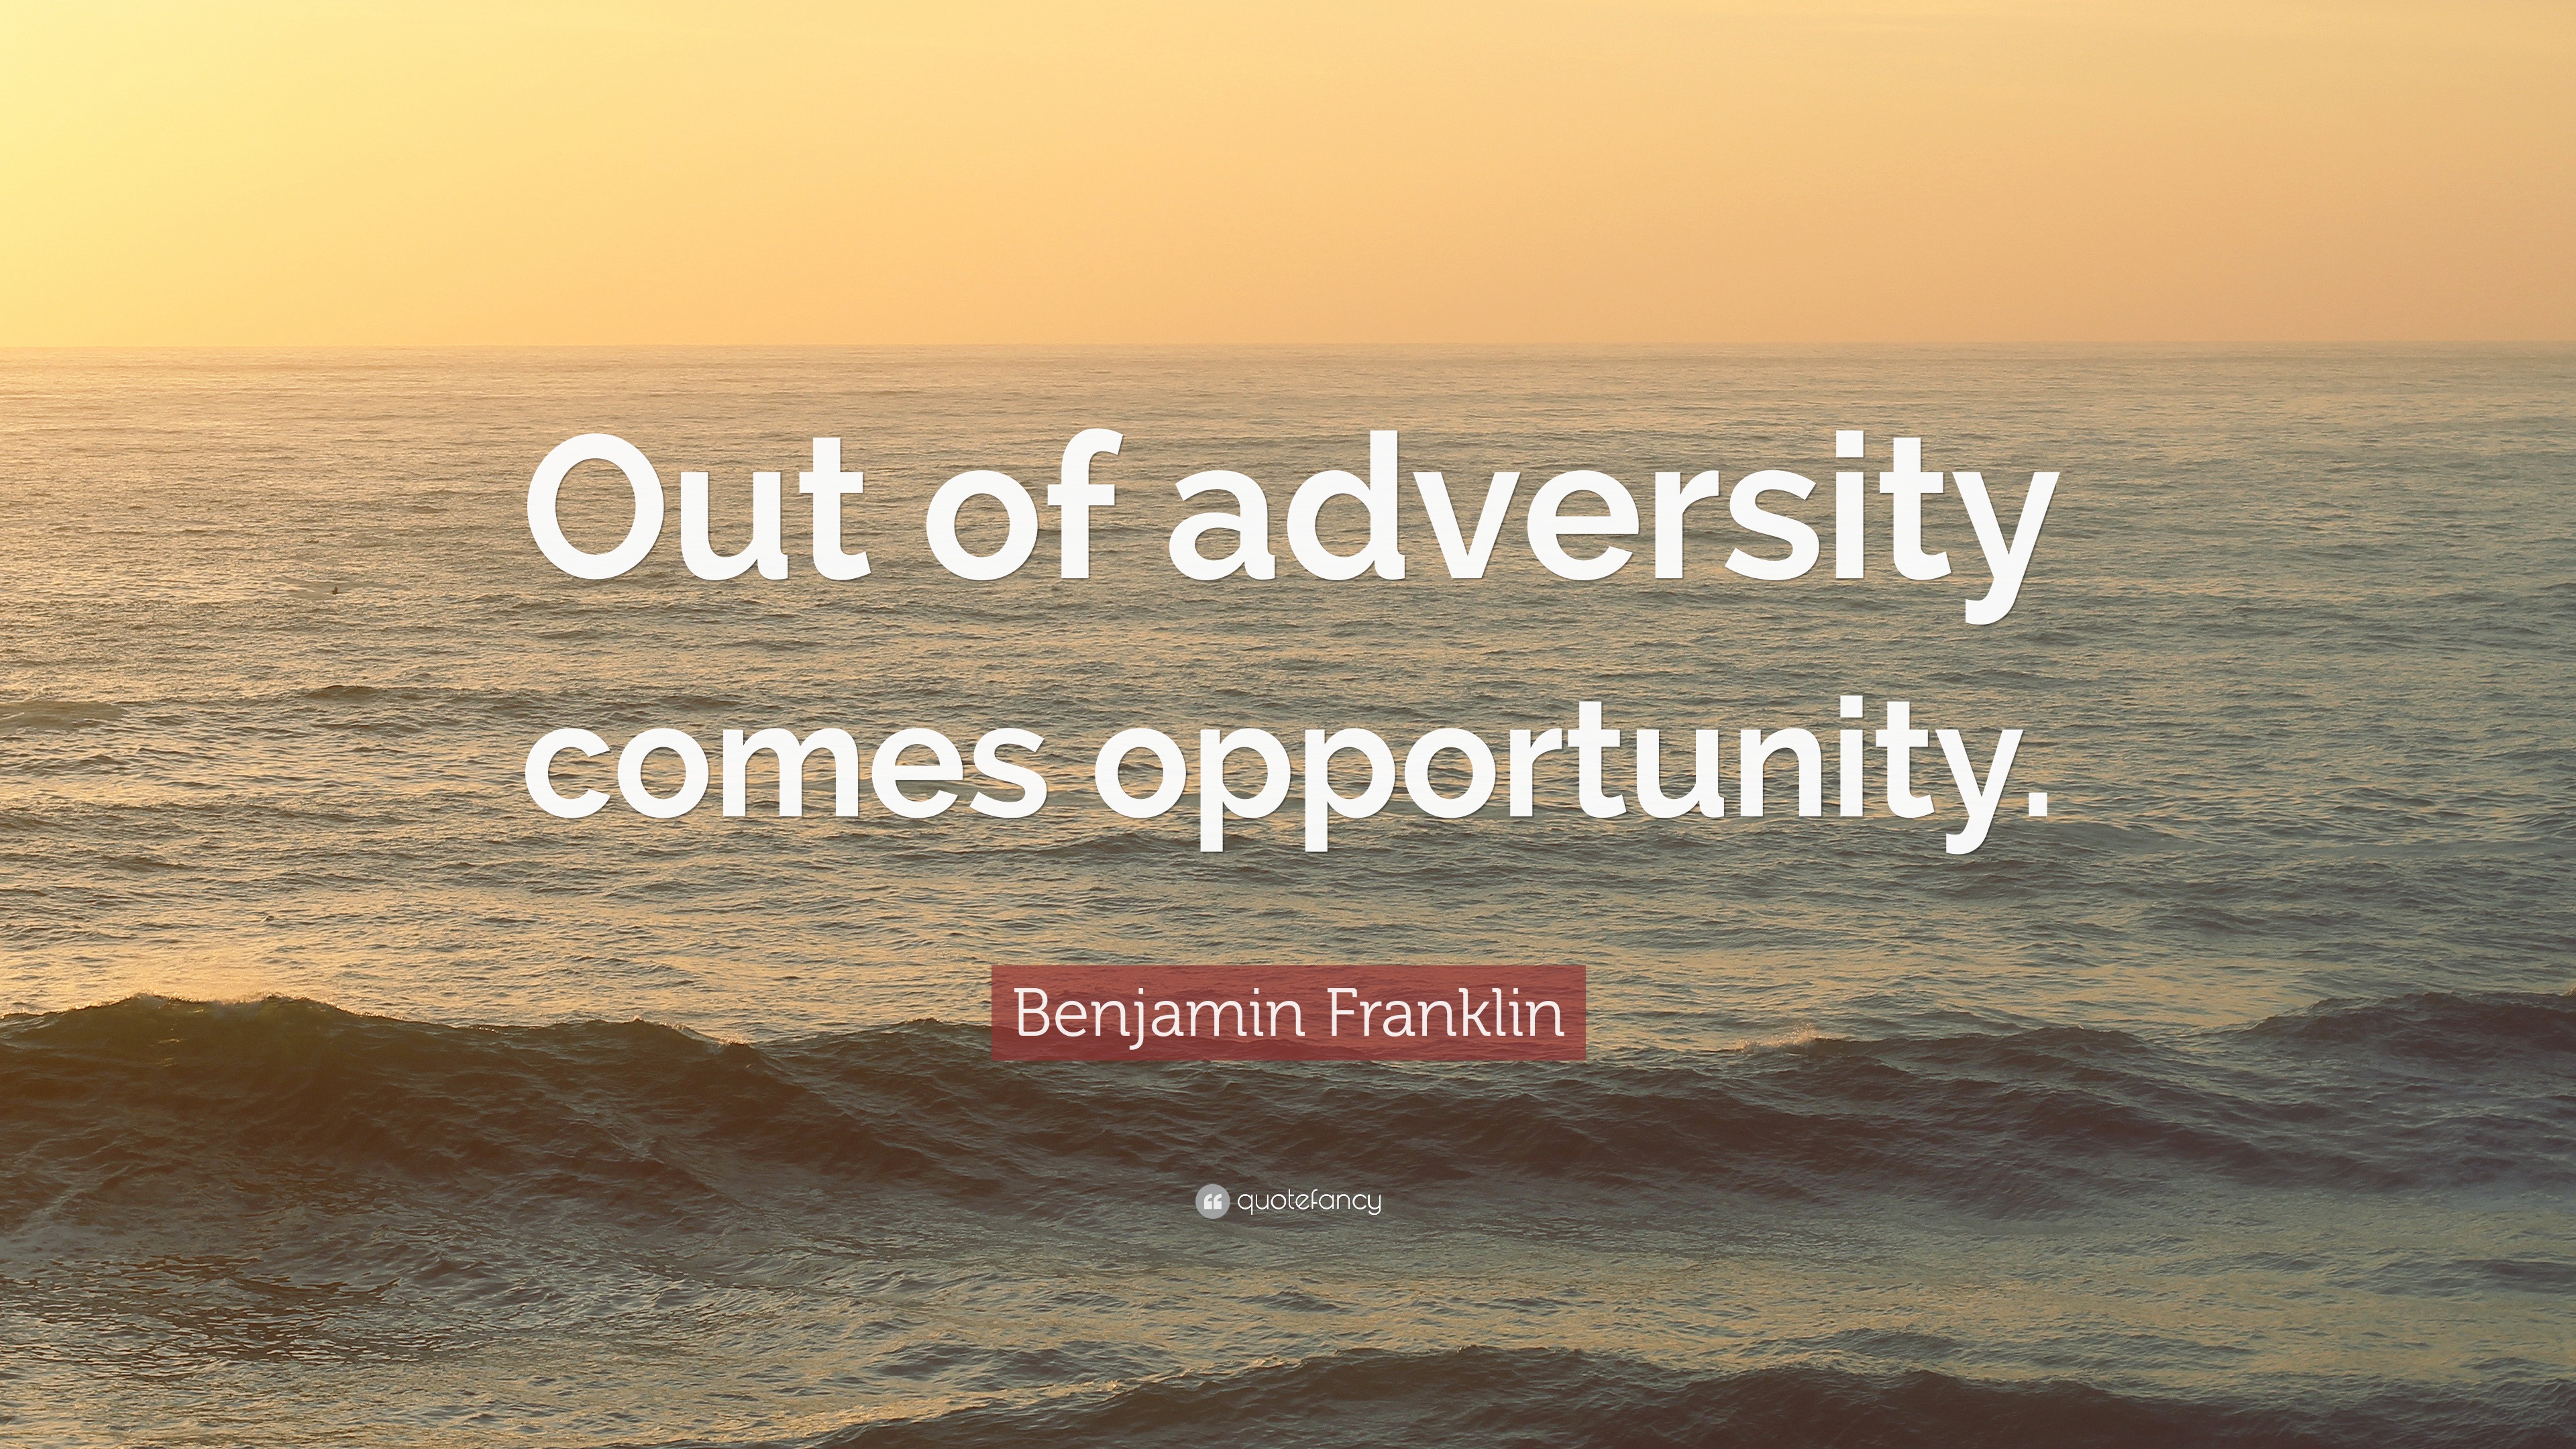 Benjamin Franklin Quote “Out of adversity comes opportunity.”